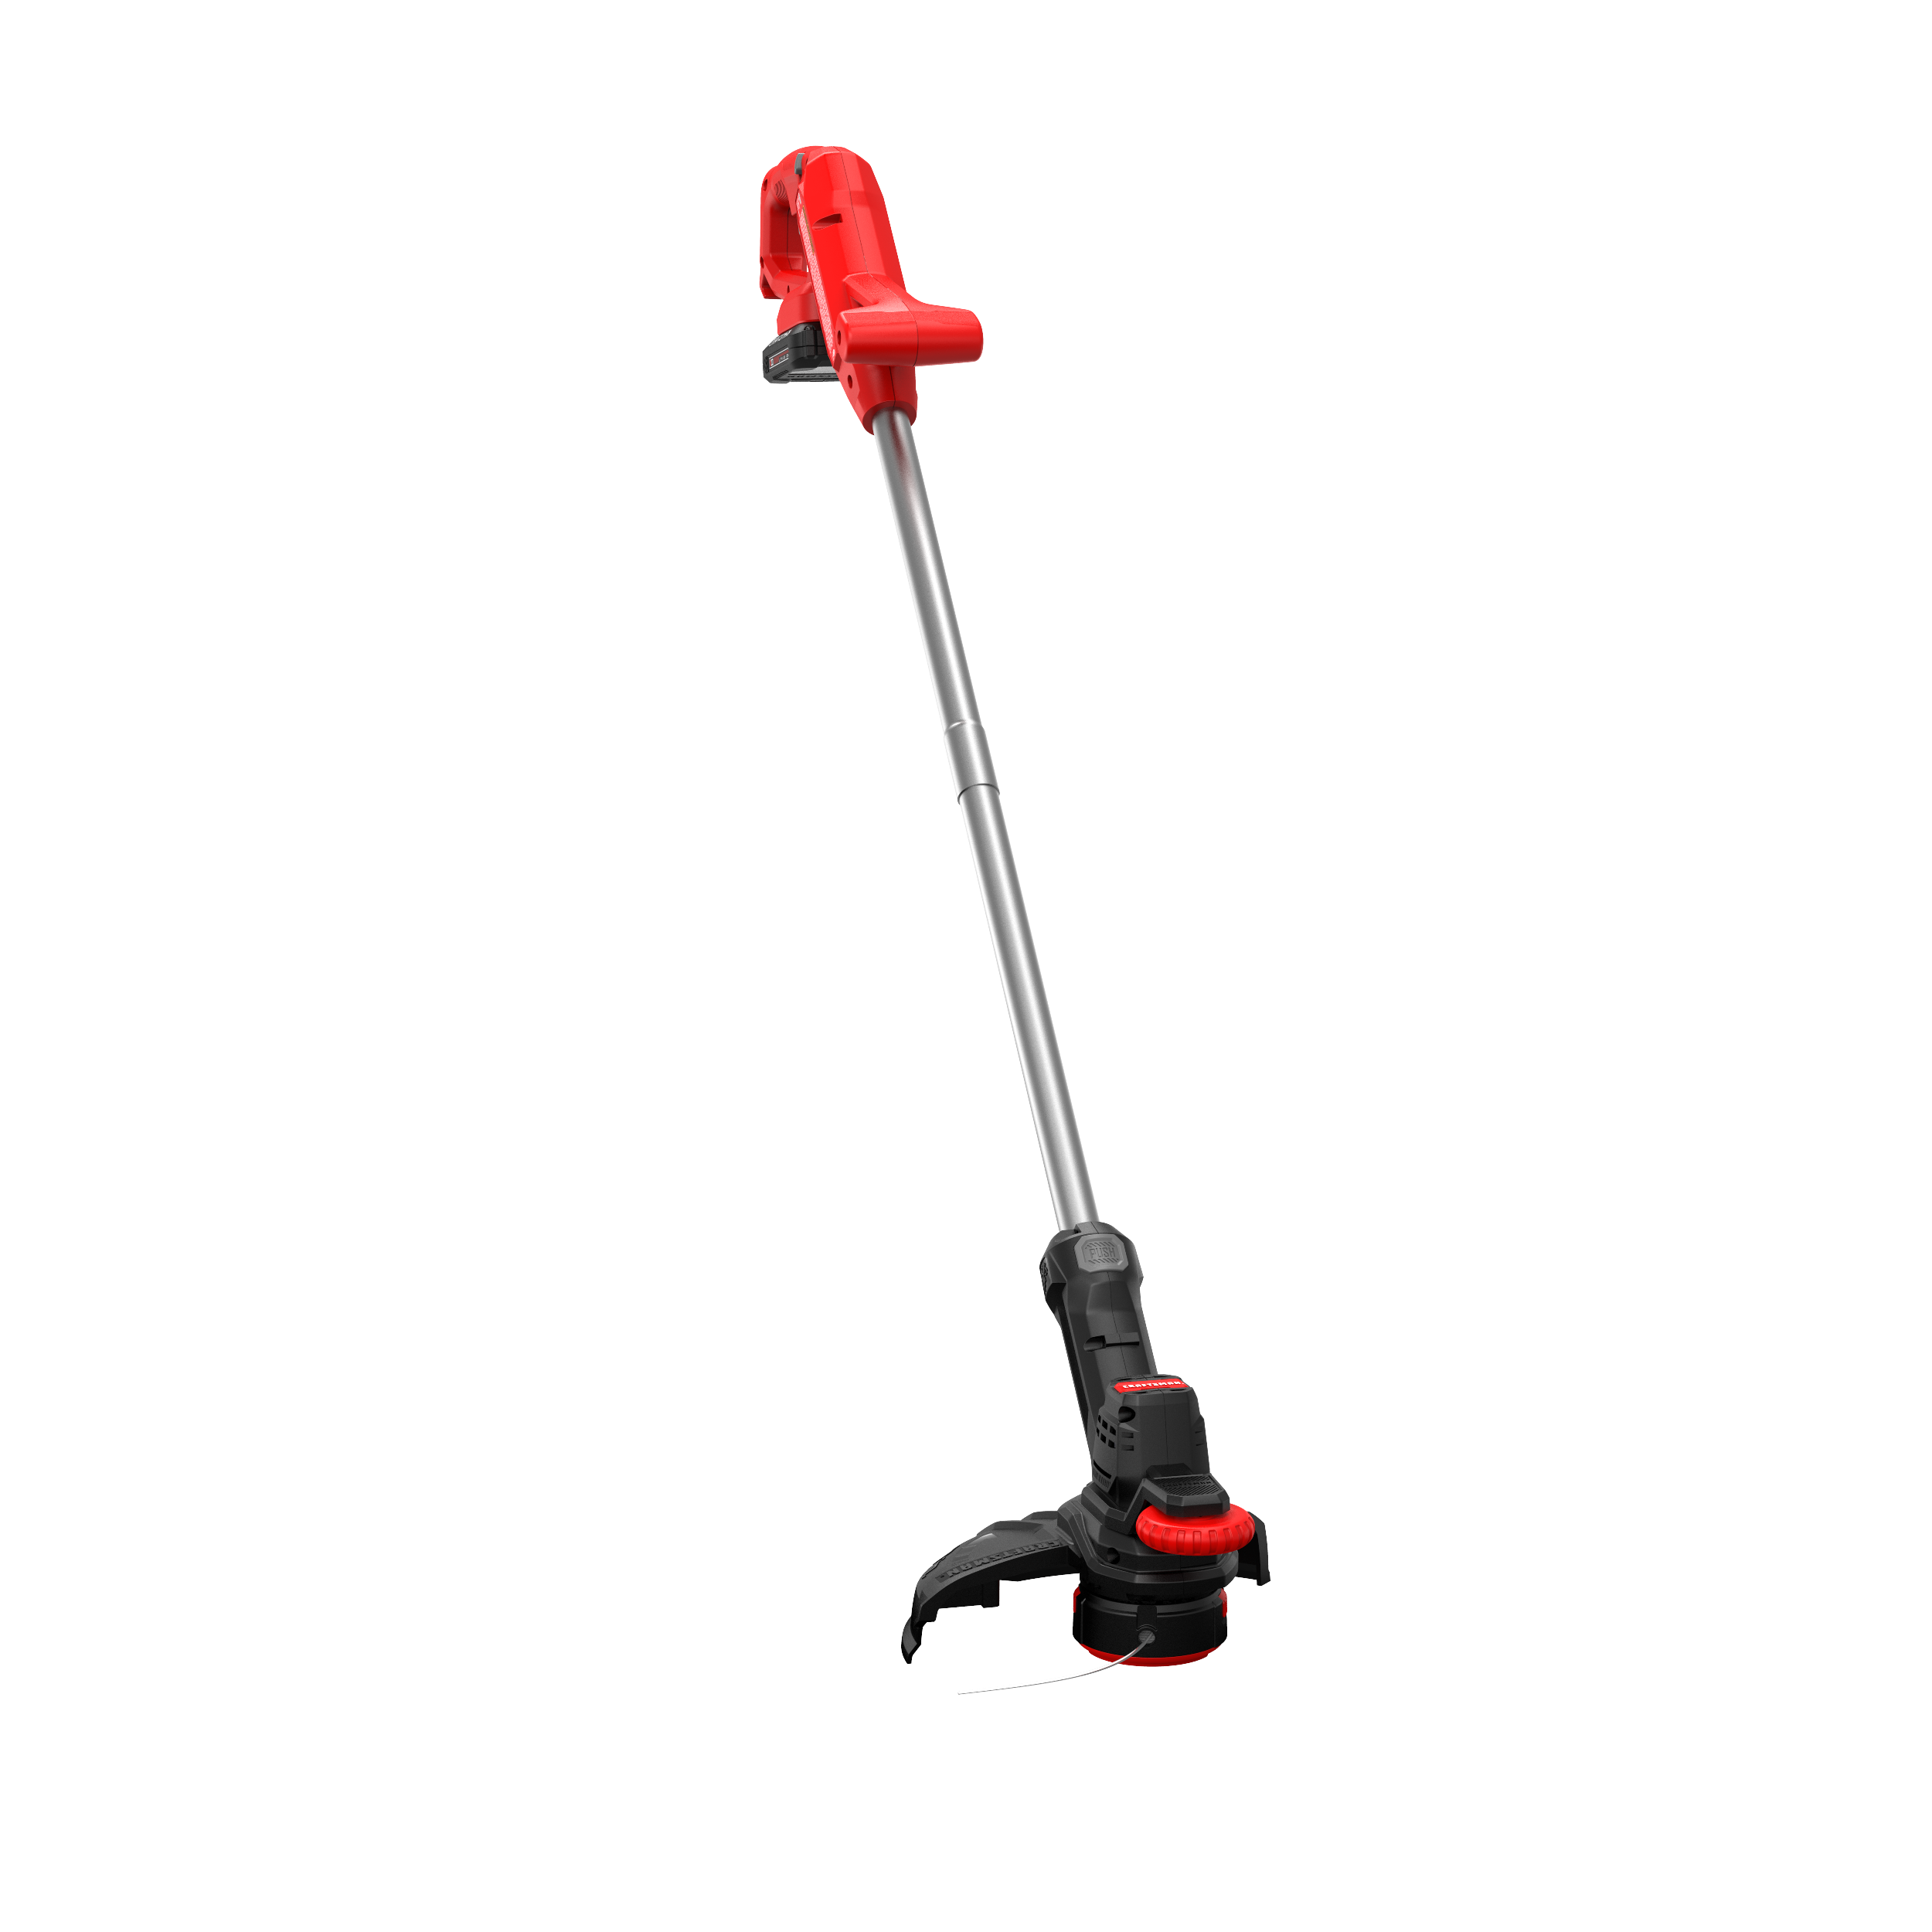 V20* Cordless 10 in WEEDWACKER® String Trimmer and Edger (Tool Only)